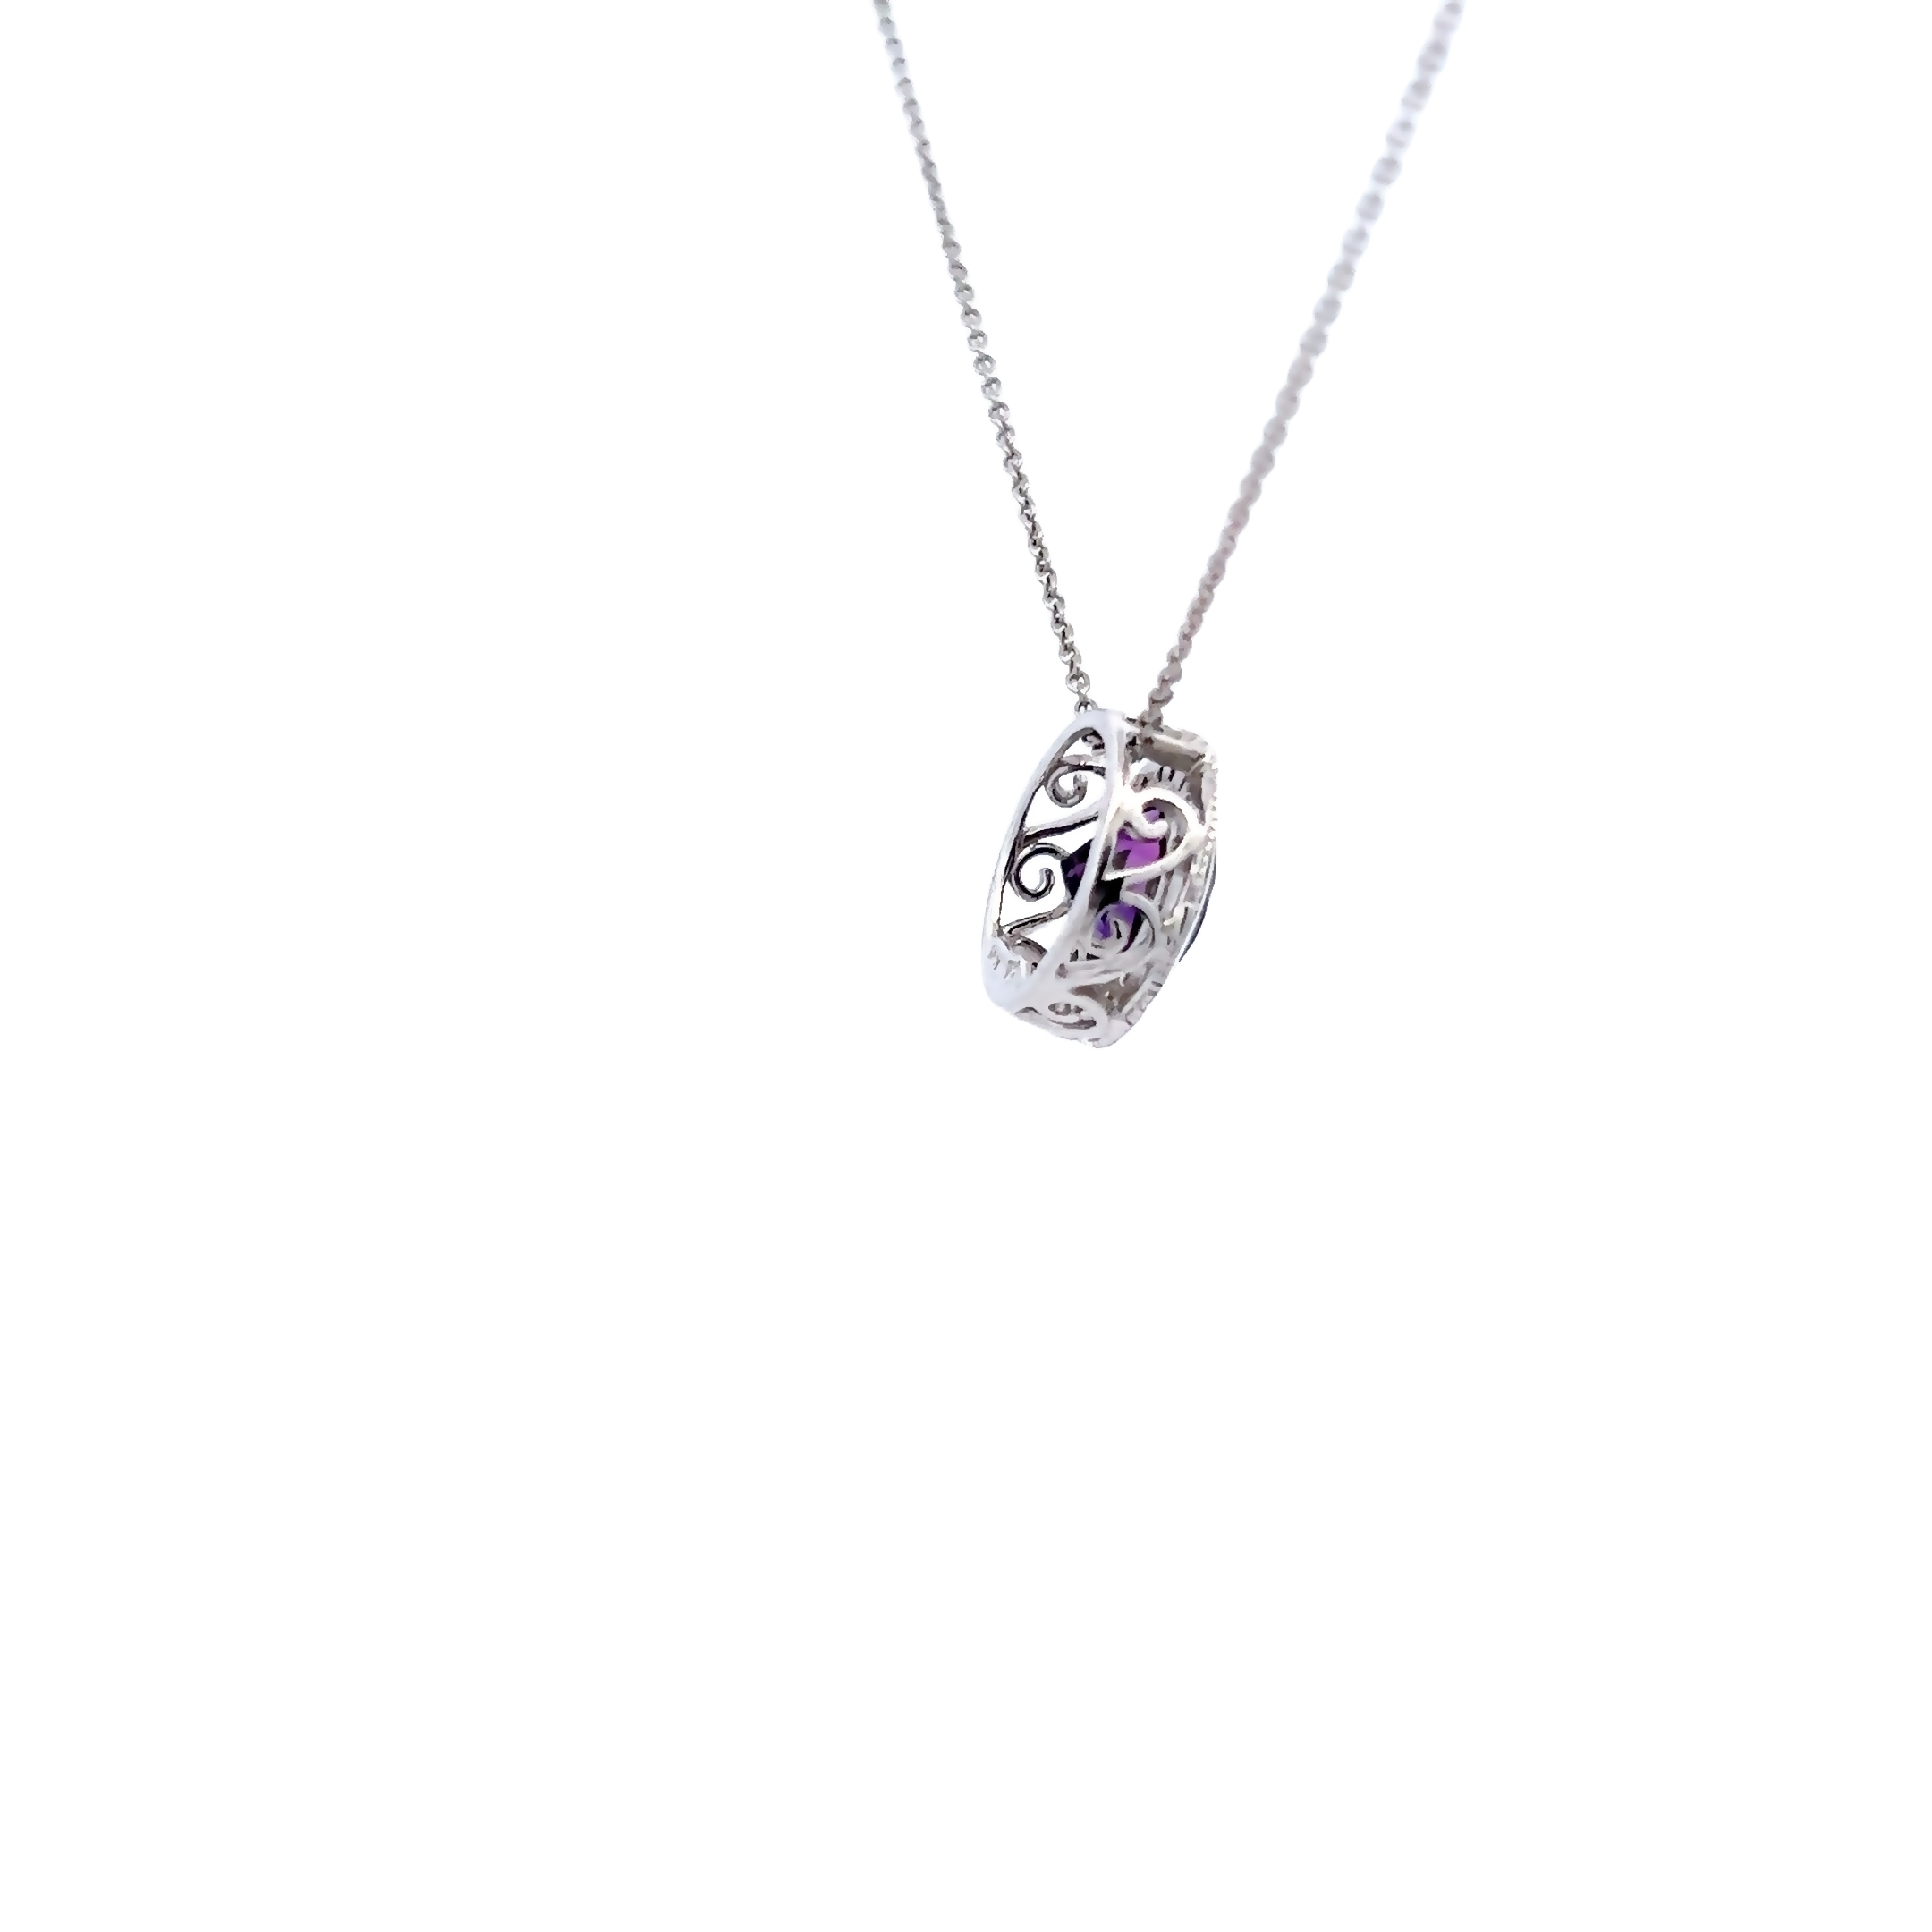 14k White Gold Amethyst Halo Necklace